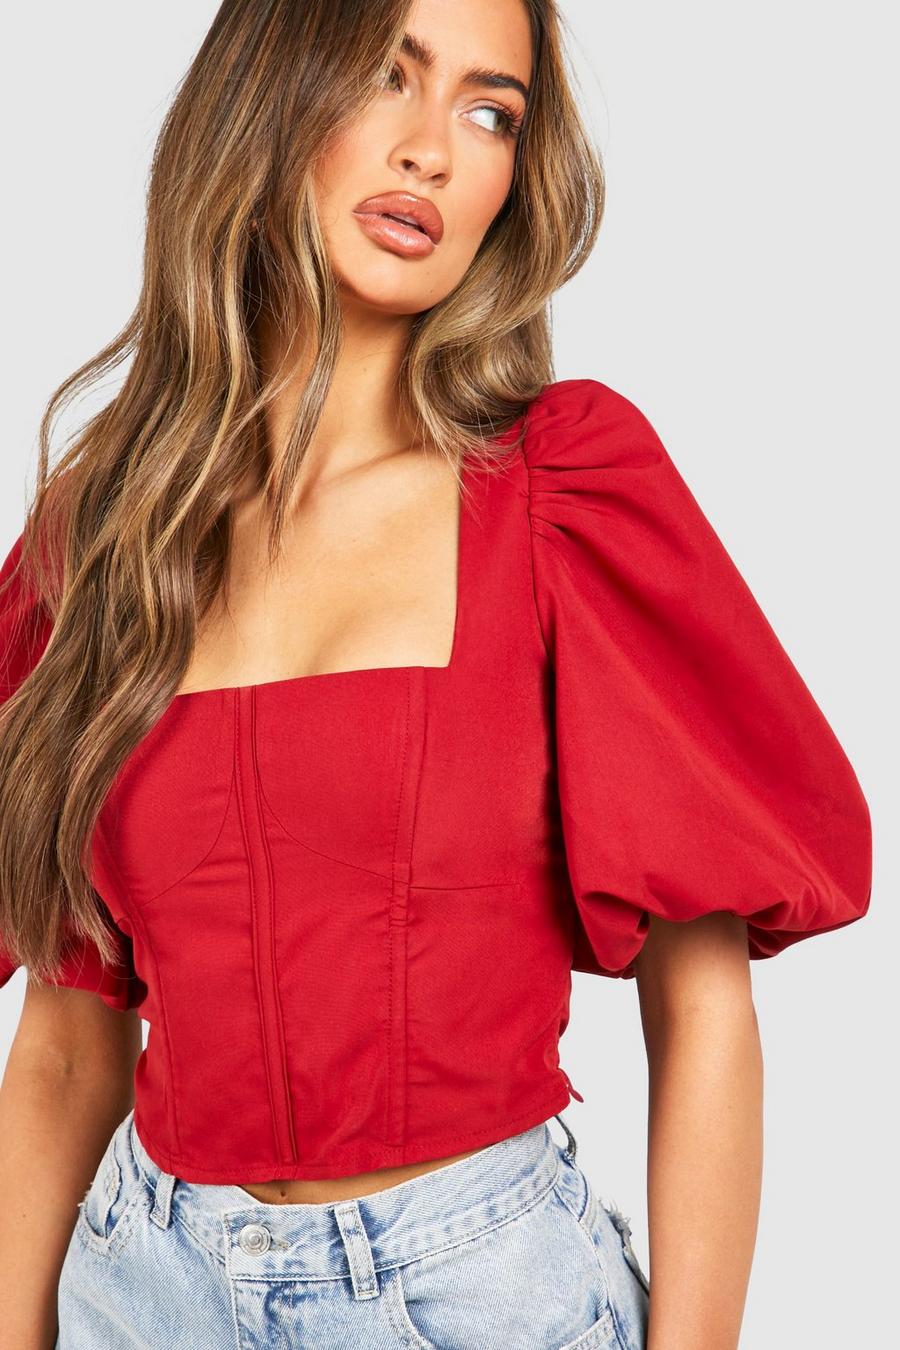 Square Necklined Corset Top Red